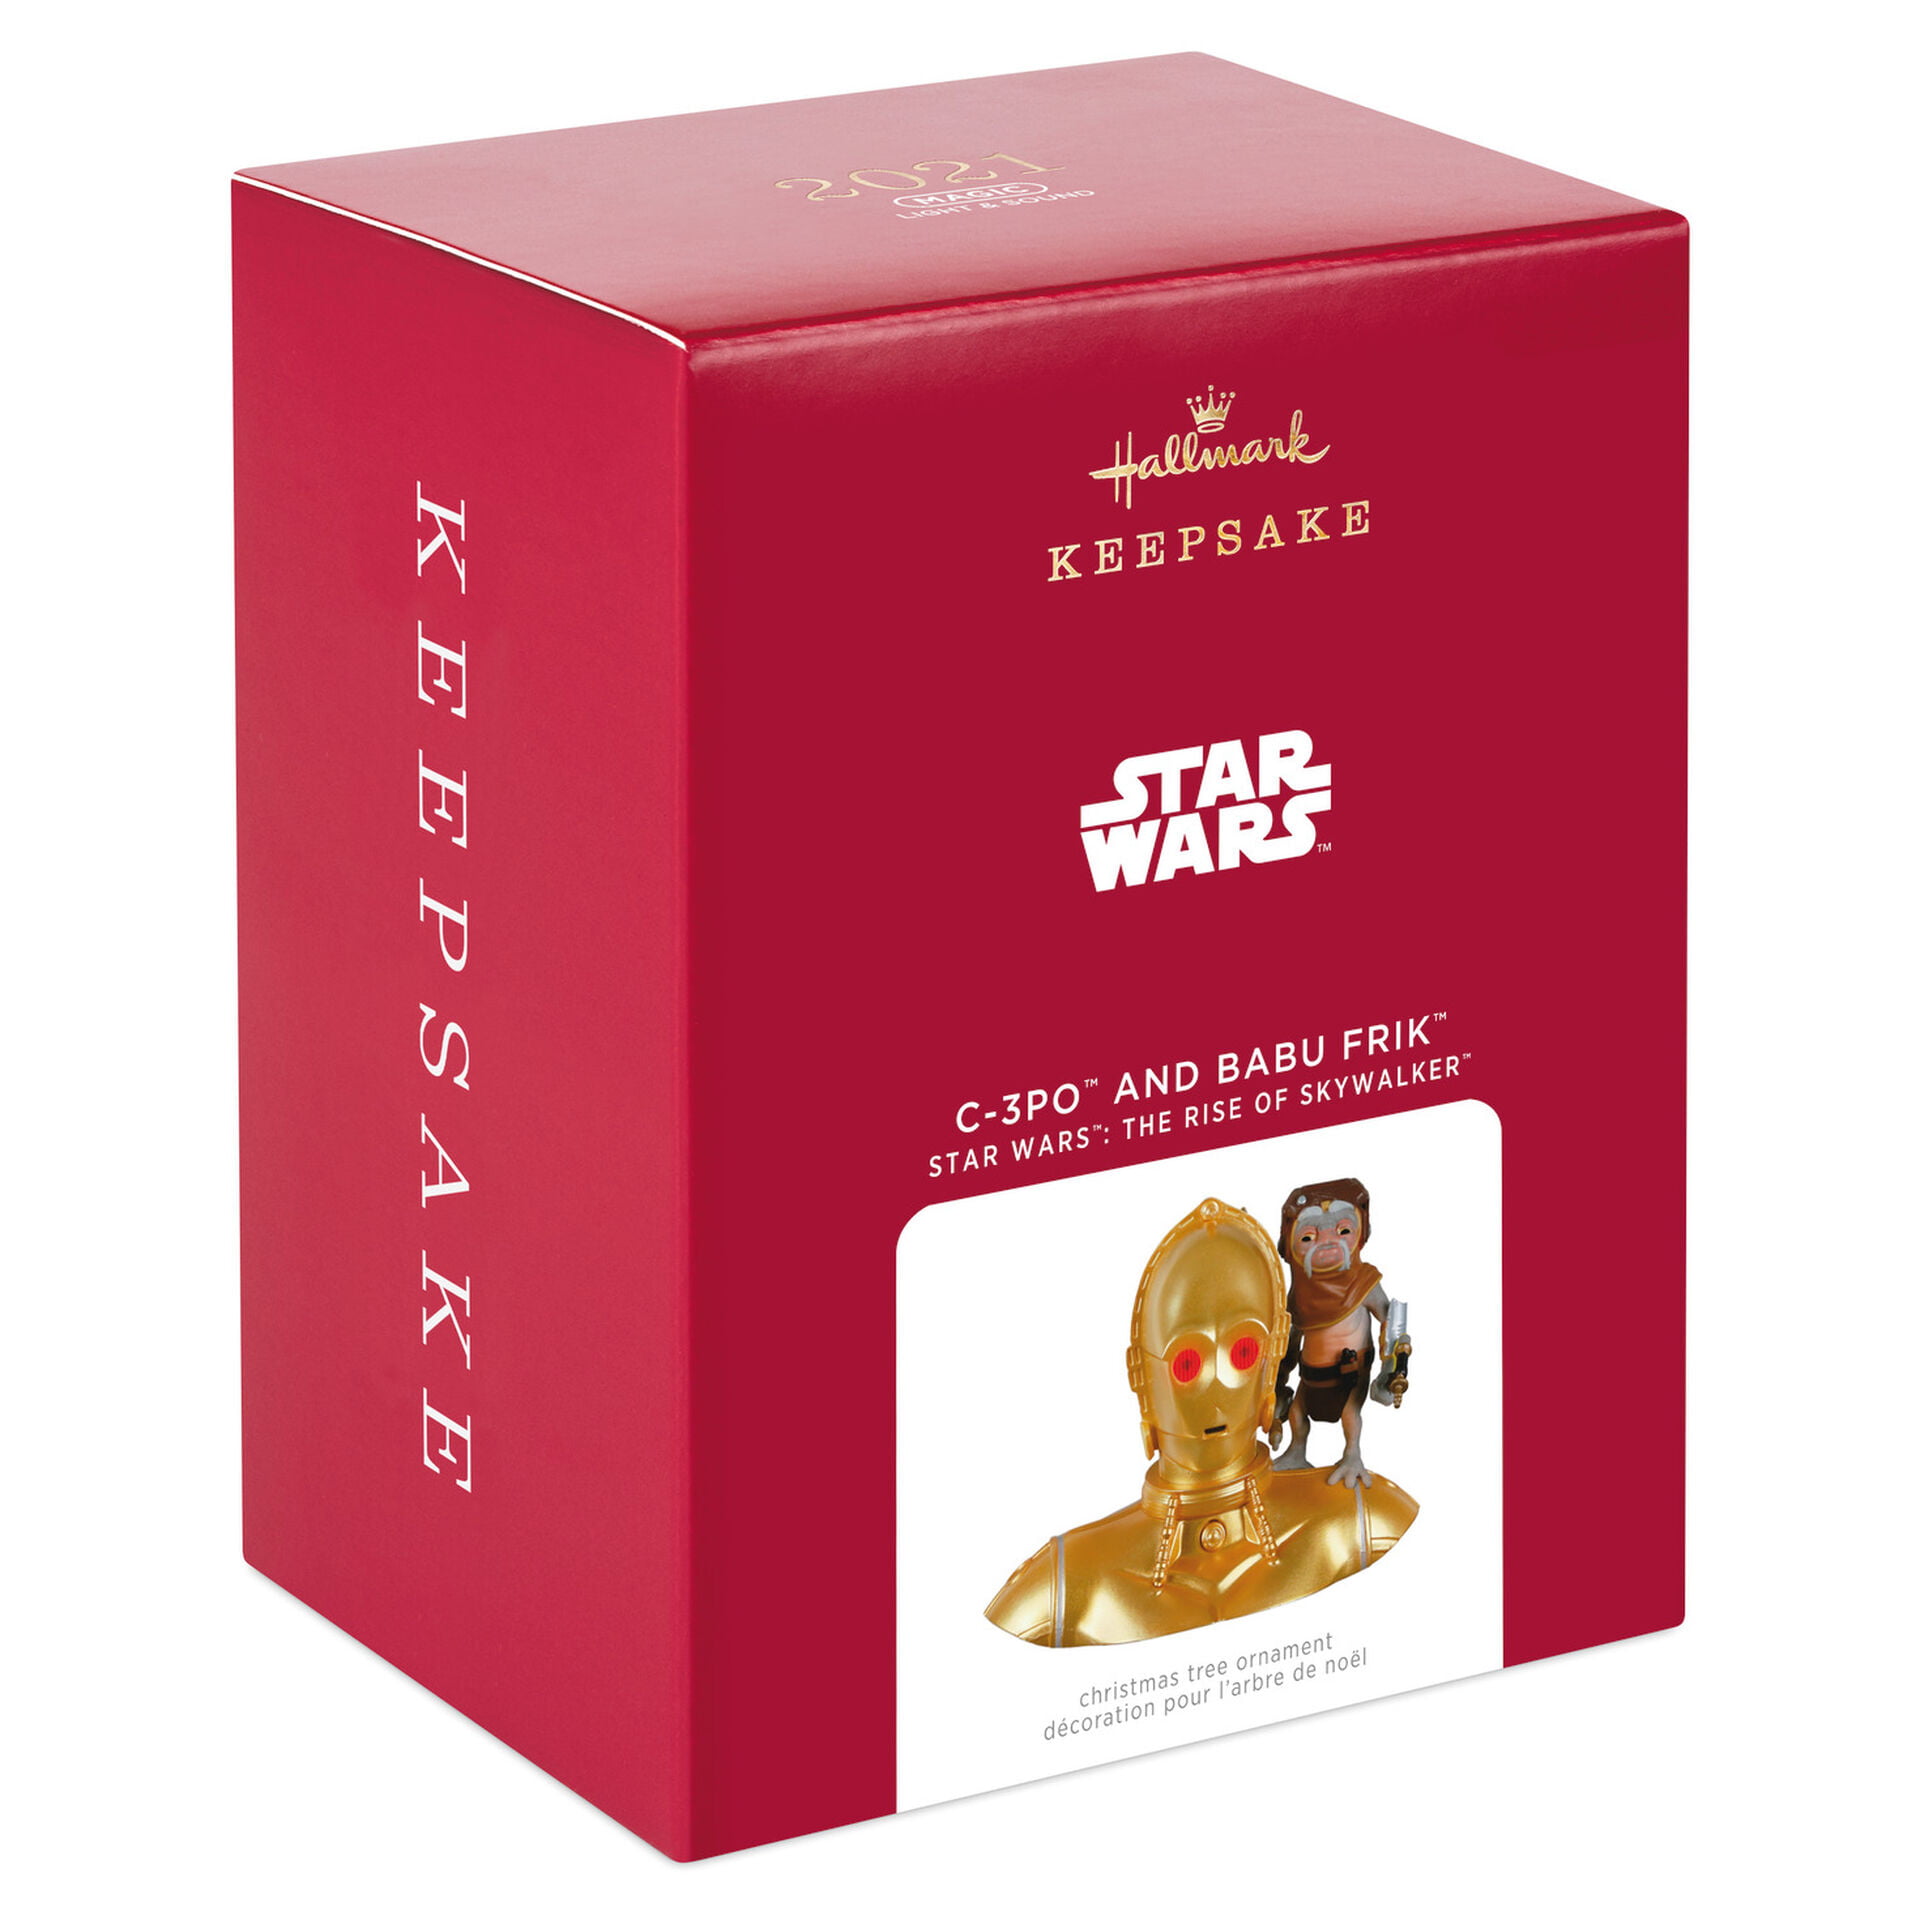 Star War the Rise of Skywalker Christmas Ornament C3PO droid 